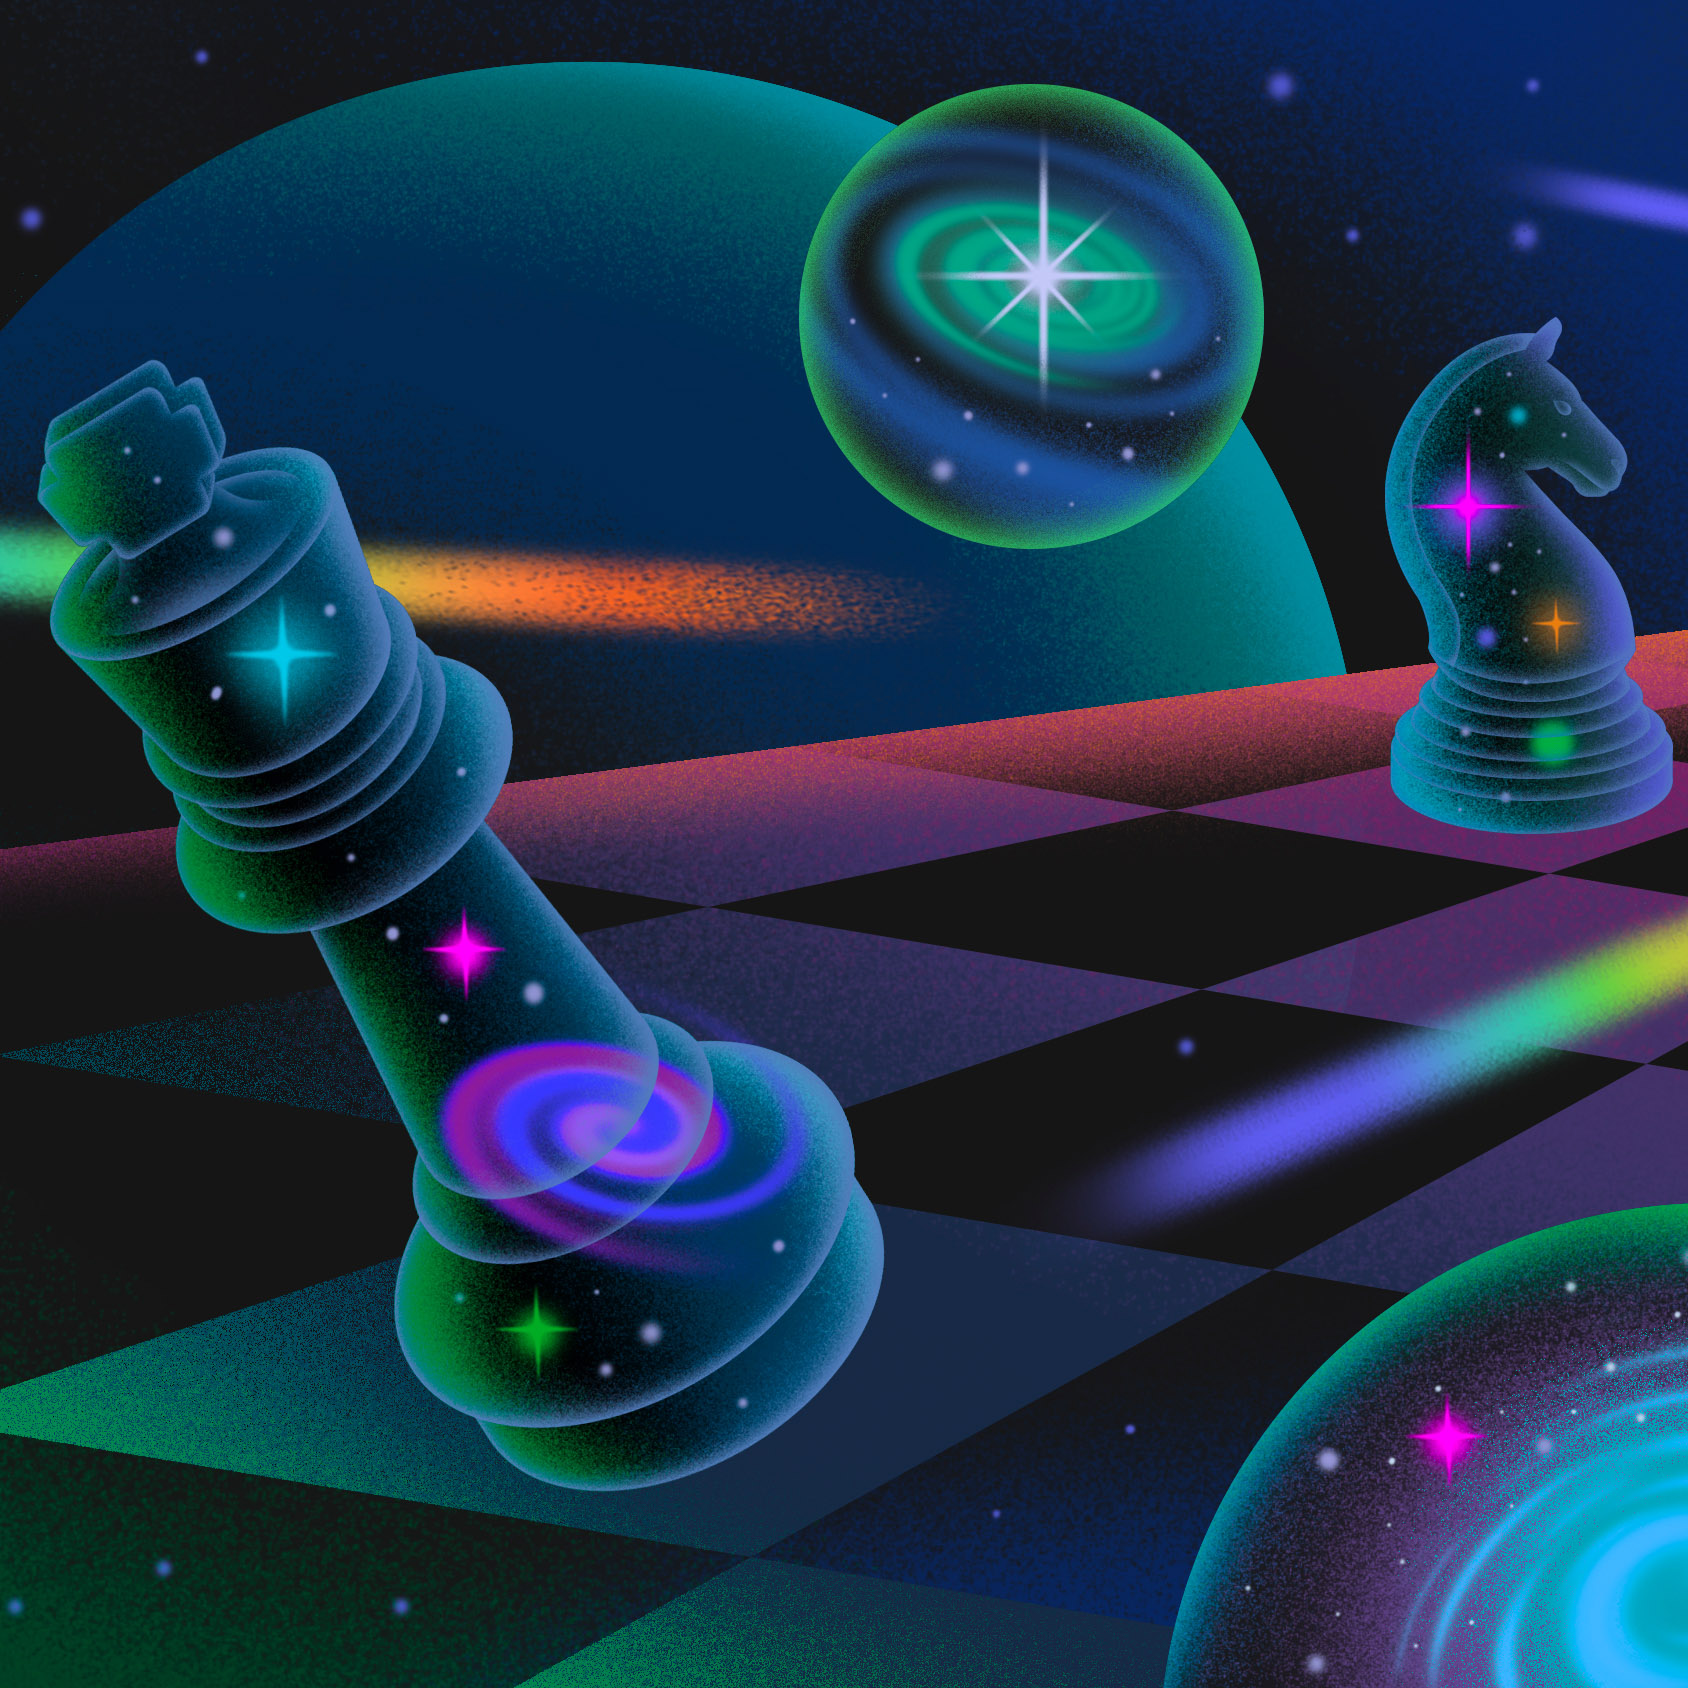 General Knowledge Facts - There are more possible iterations of a game of  chess than there are atoms in the known universe.